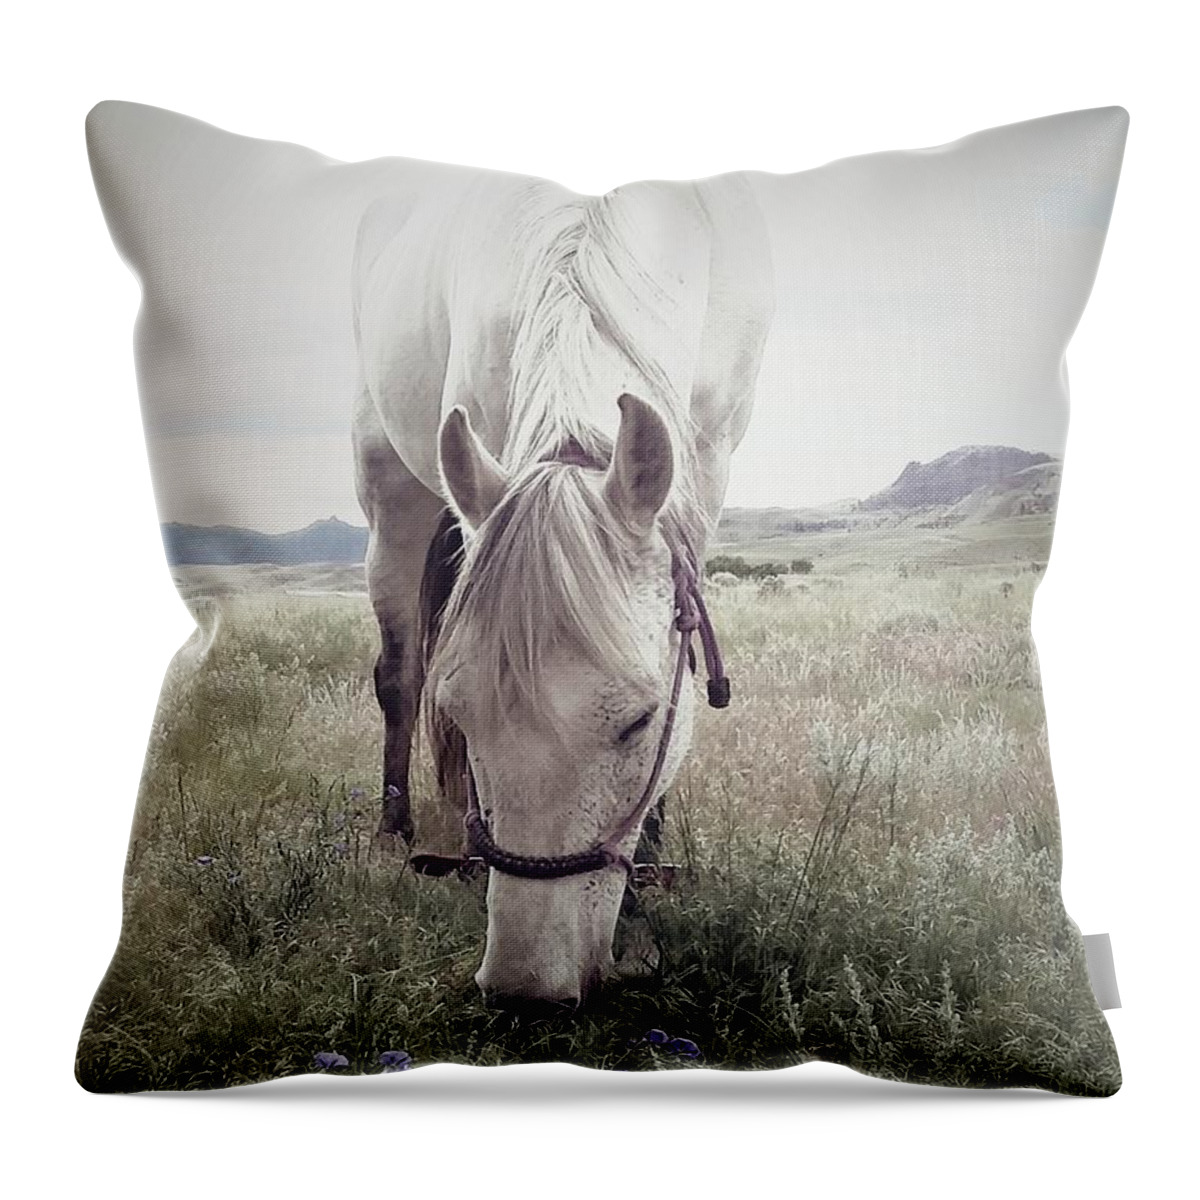 Horse Throw Pillow featuring the photograph Disappearing Rosa by Alden White Ballard